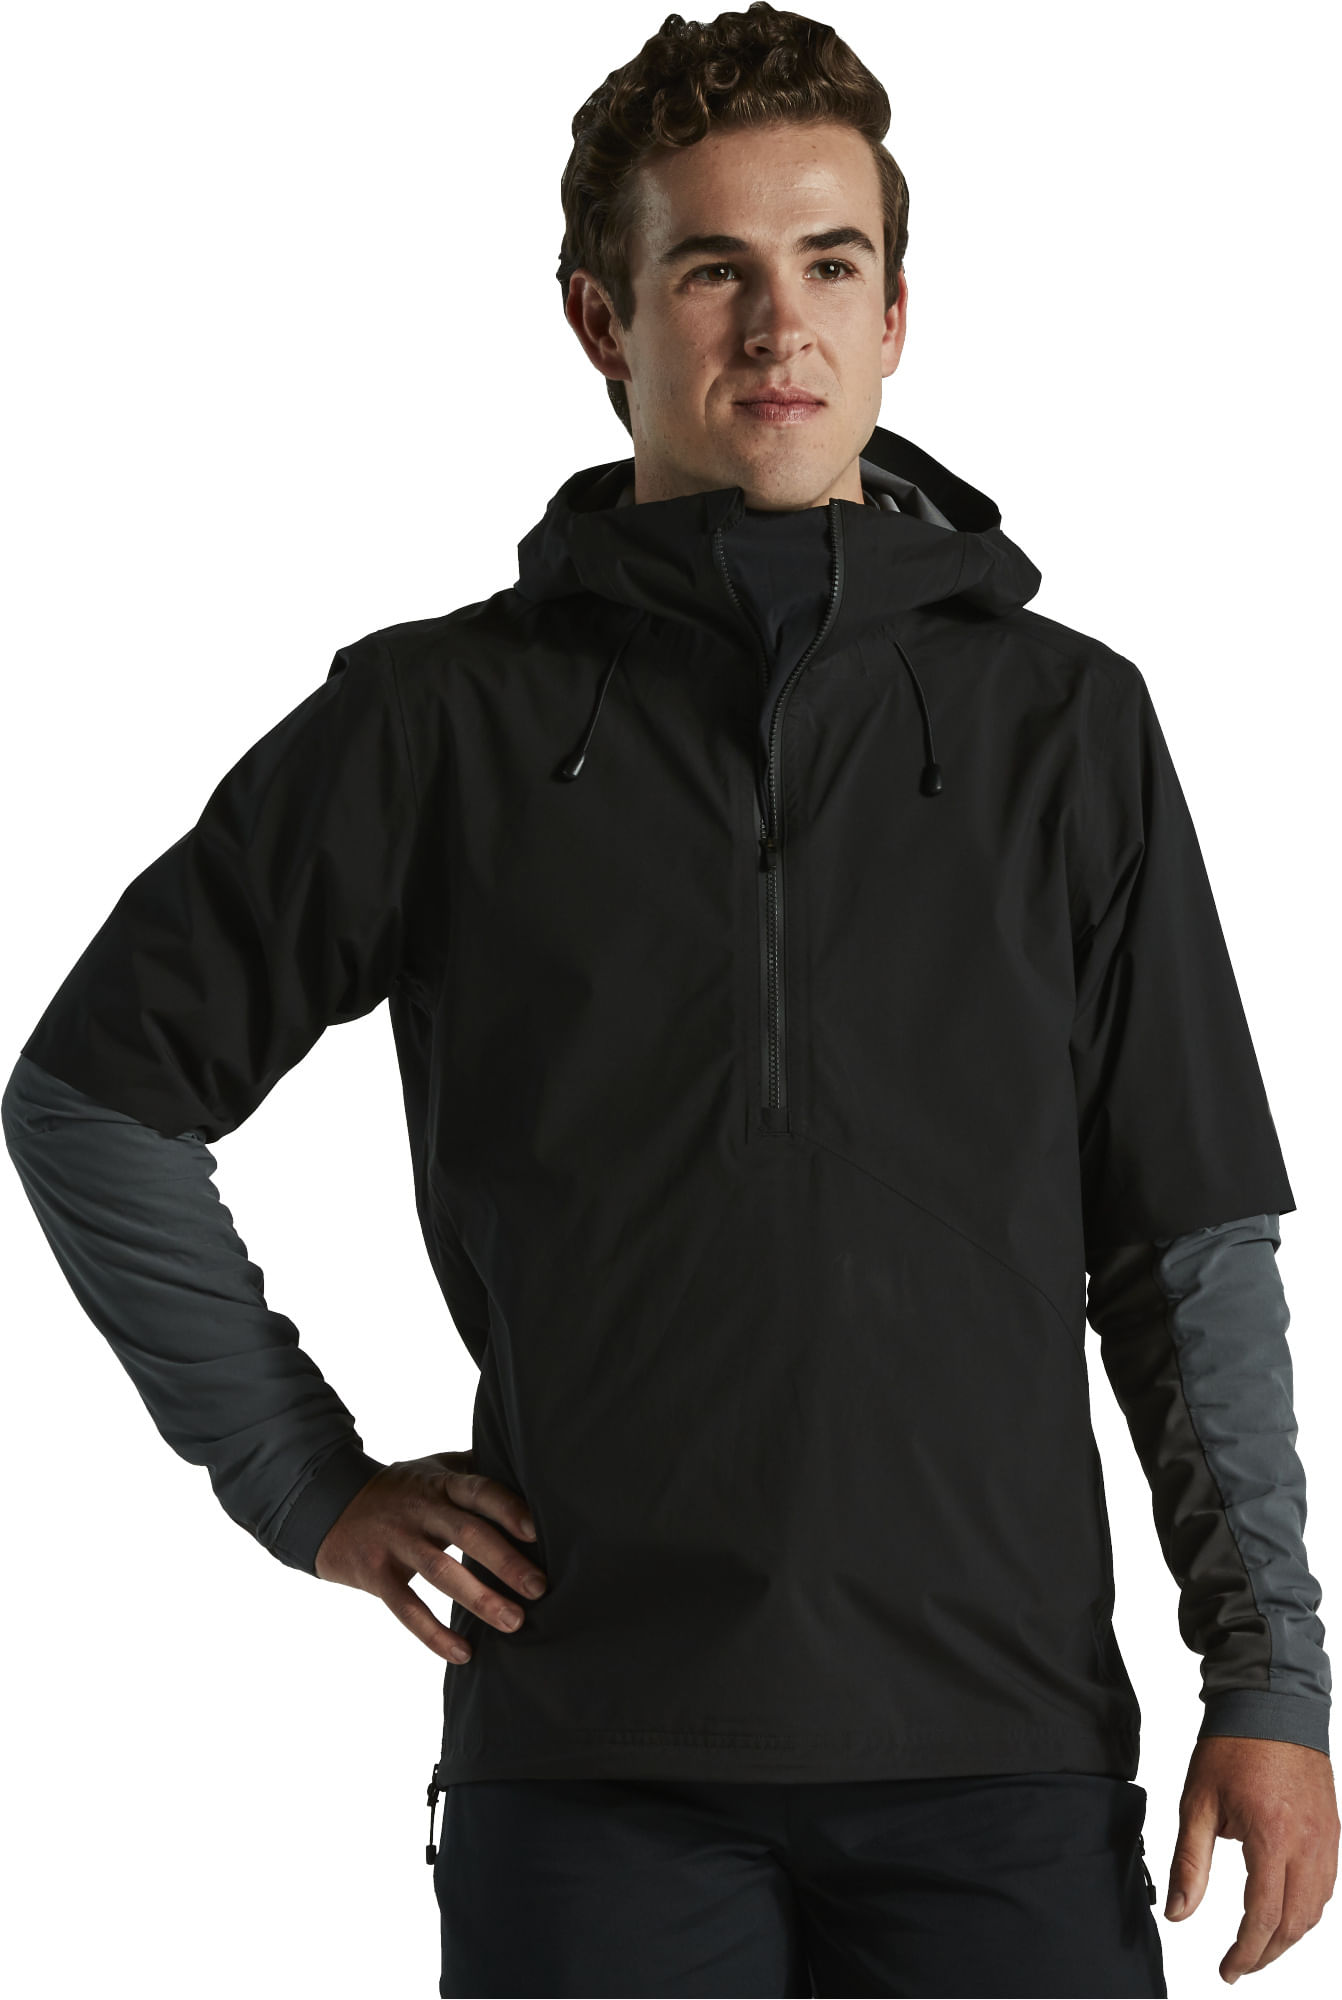 2021 Specialized Short Sleeve Anorak | Cycling Jackets